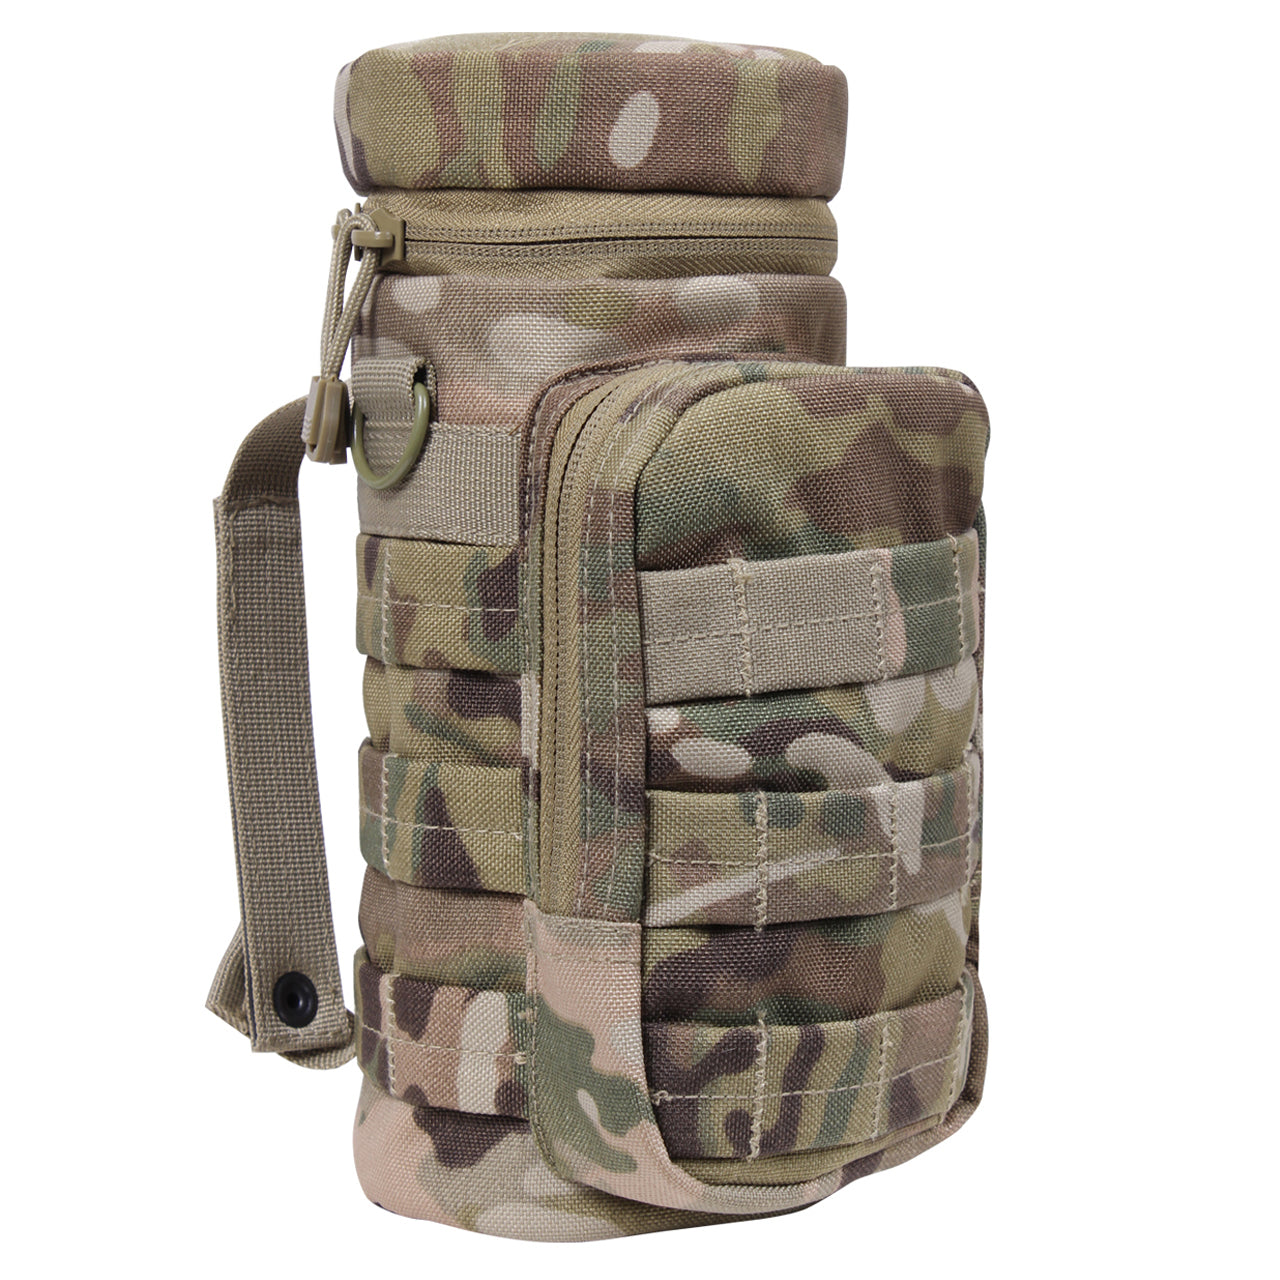 Durable Denier Polyester Material 10.5" Tall X 4" Diameter 6.5" X 4" Front Zippered Pouch W/ MOLLE Loops On Front Zipper Closure Flip Top And Two MOLLE Straps On Back D-Ring On Each Side Straw Hole On Top W/ Hook And Loop Closure Features A Drain Hole 4" X 1" Loop On Top And MOLLE Loop Around Entire Pouch www.moralepatches.com.au